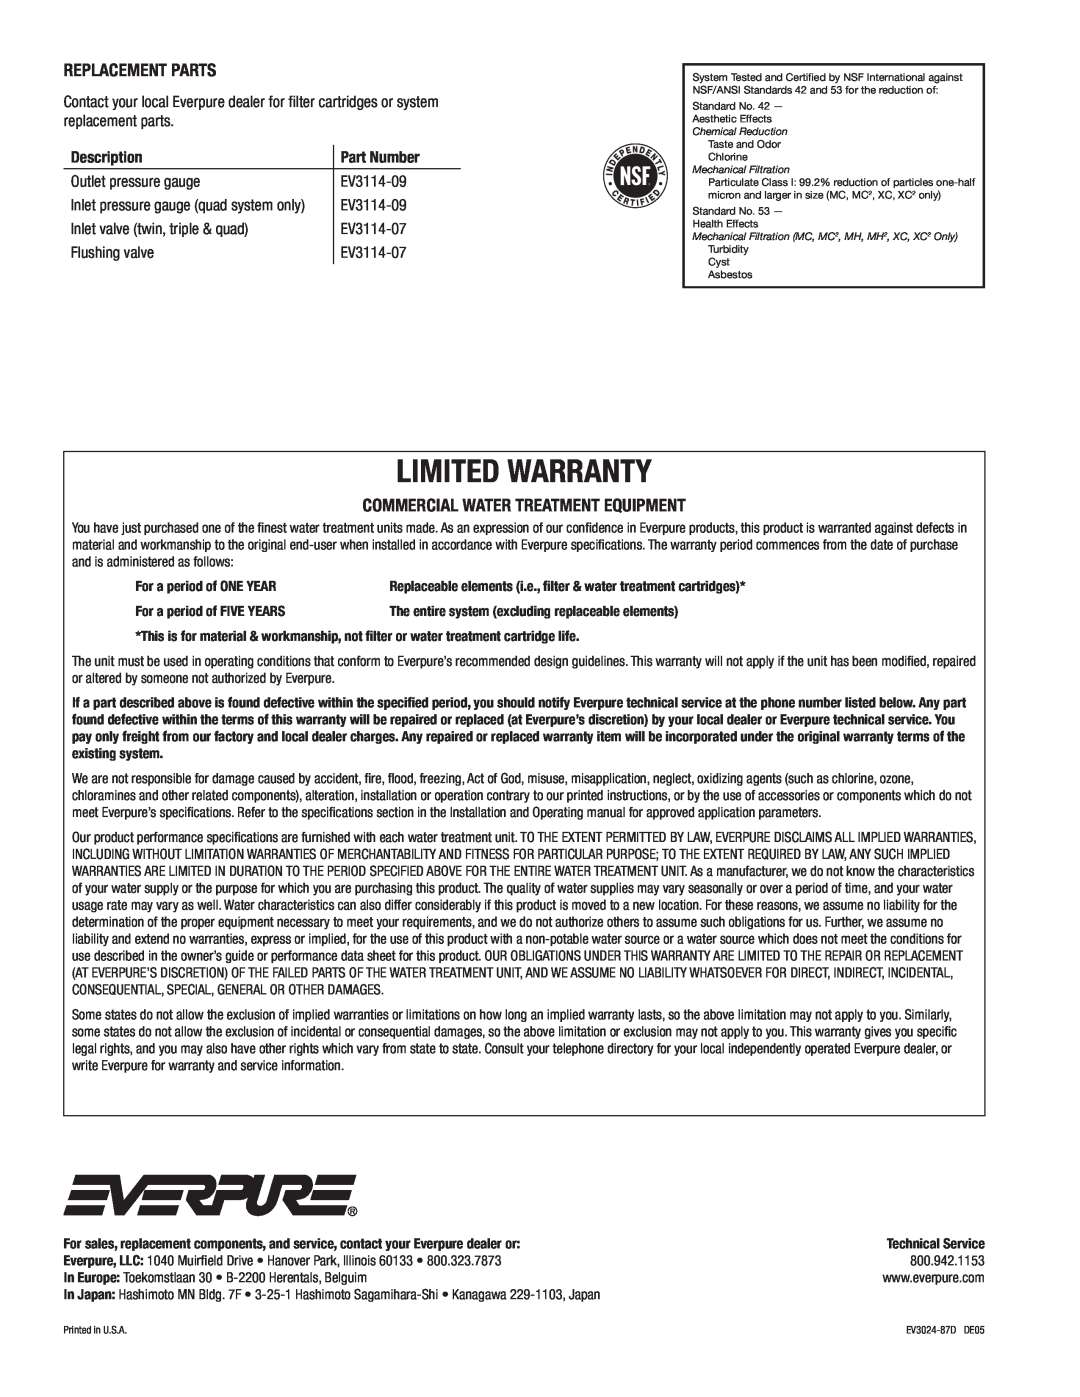 Everpure QC71 installation and operation guide Replacement Parts, Commercial Water Treatment Equipment, Limited Warranty 